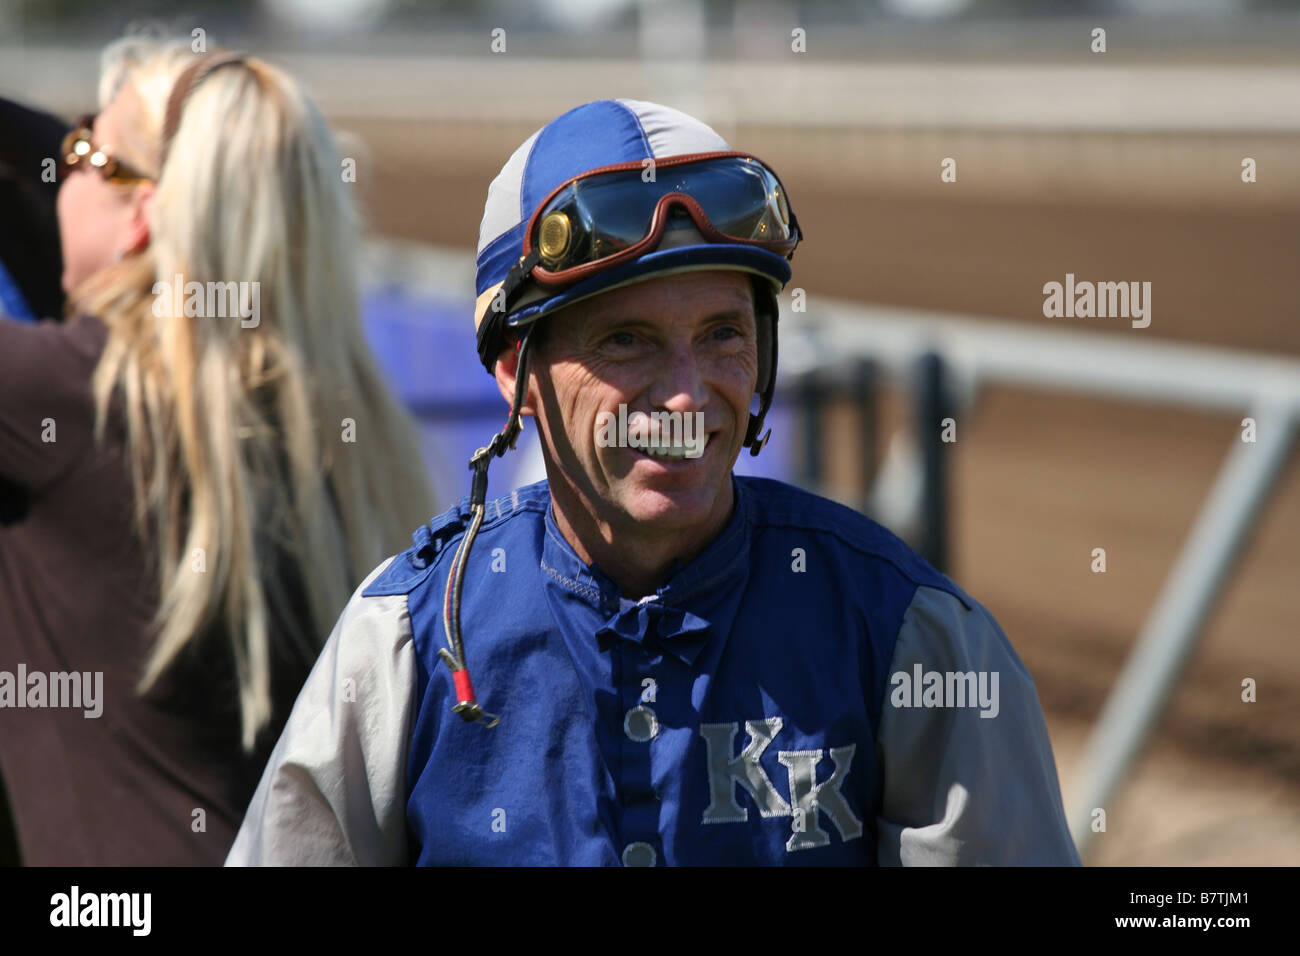 Jockey Russell Baze after a race at the San Joaquin County Fairgrounds in Stockton, California in 2008 Stock Photo